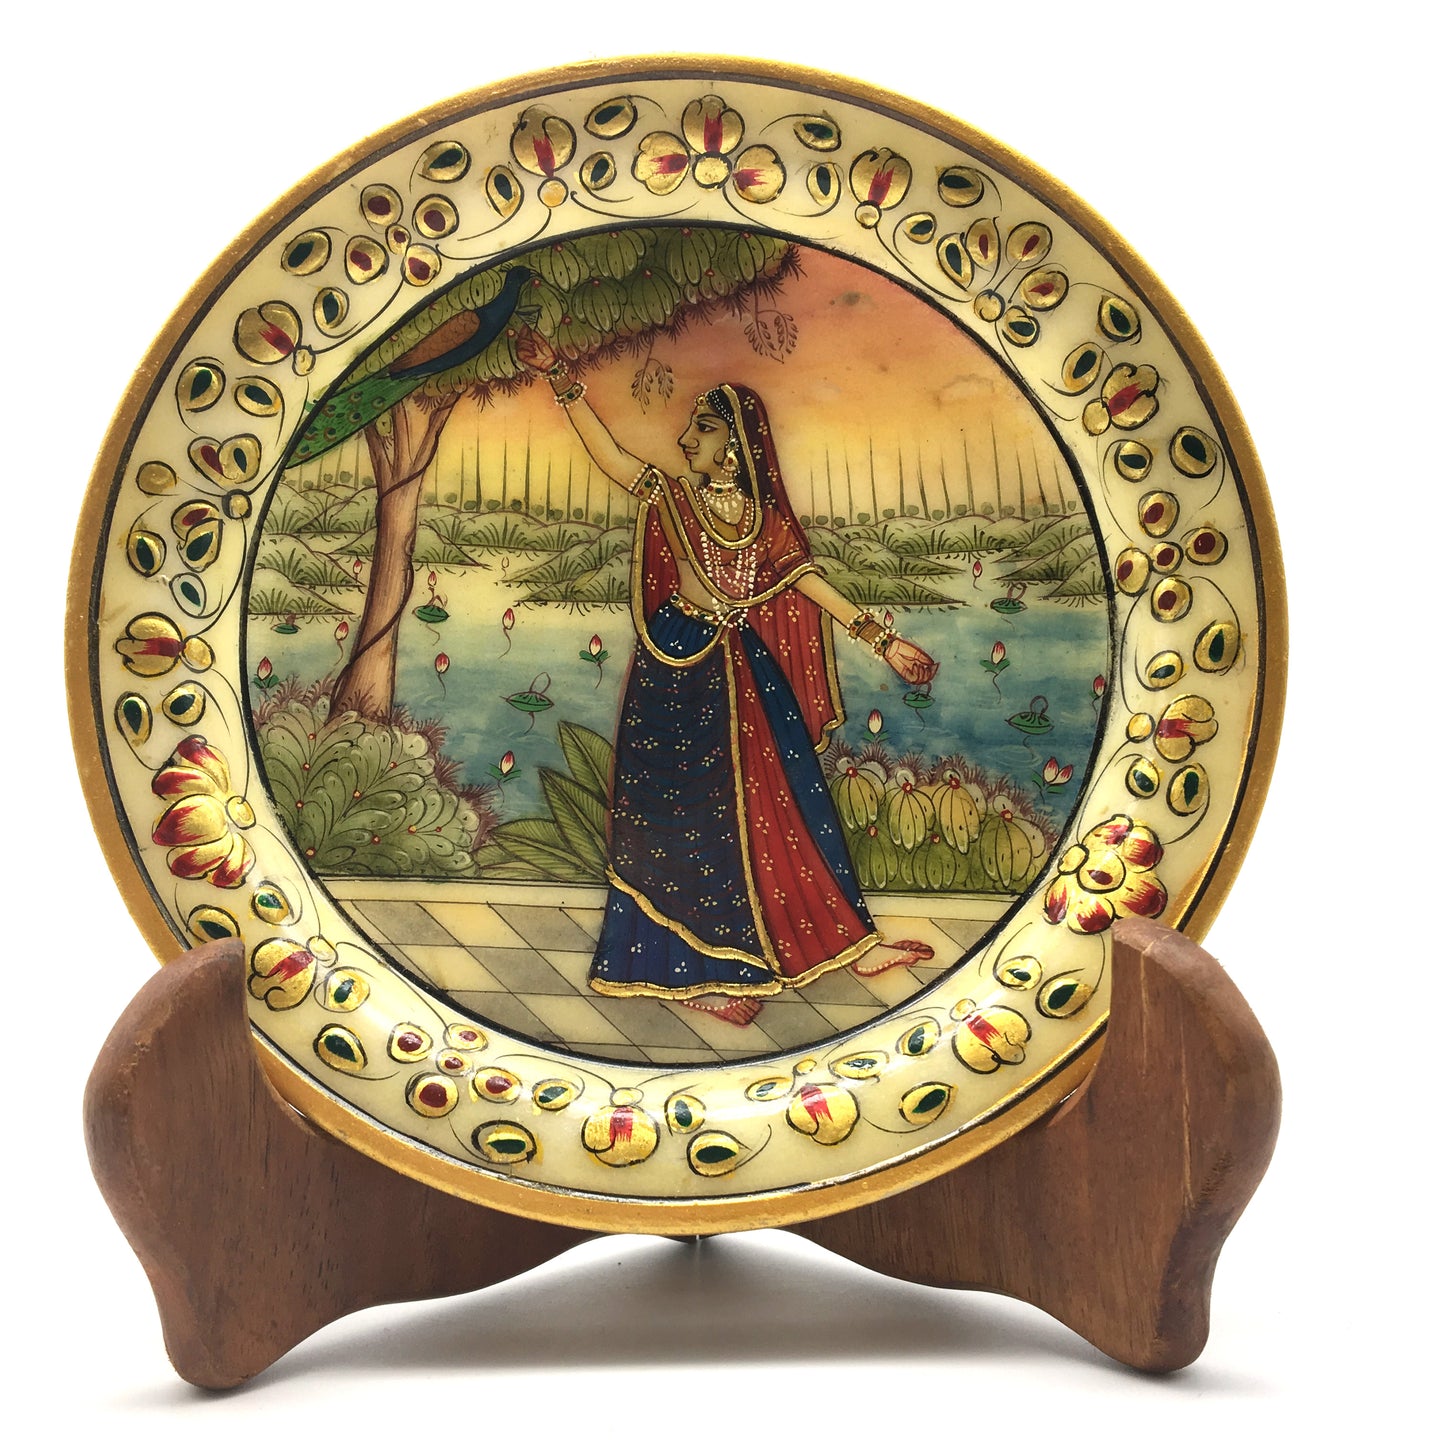 Handmade Collectible India Decorative Marble Plate with Wood Stand-Gold Trim - Montecinos Ethnic